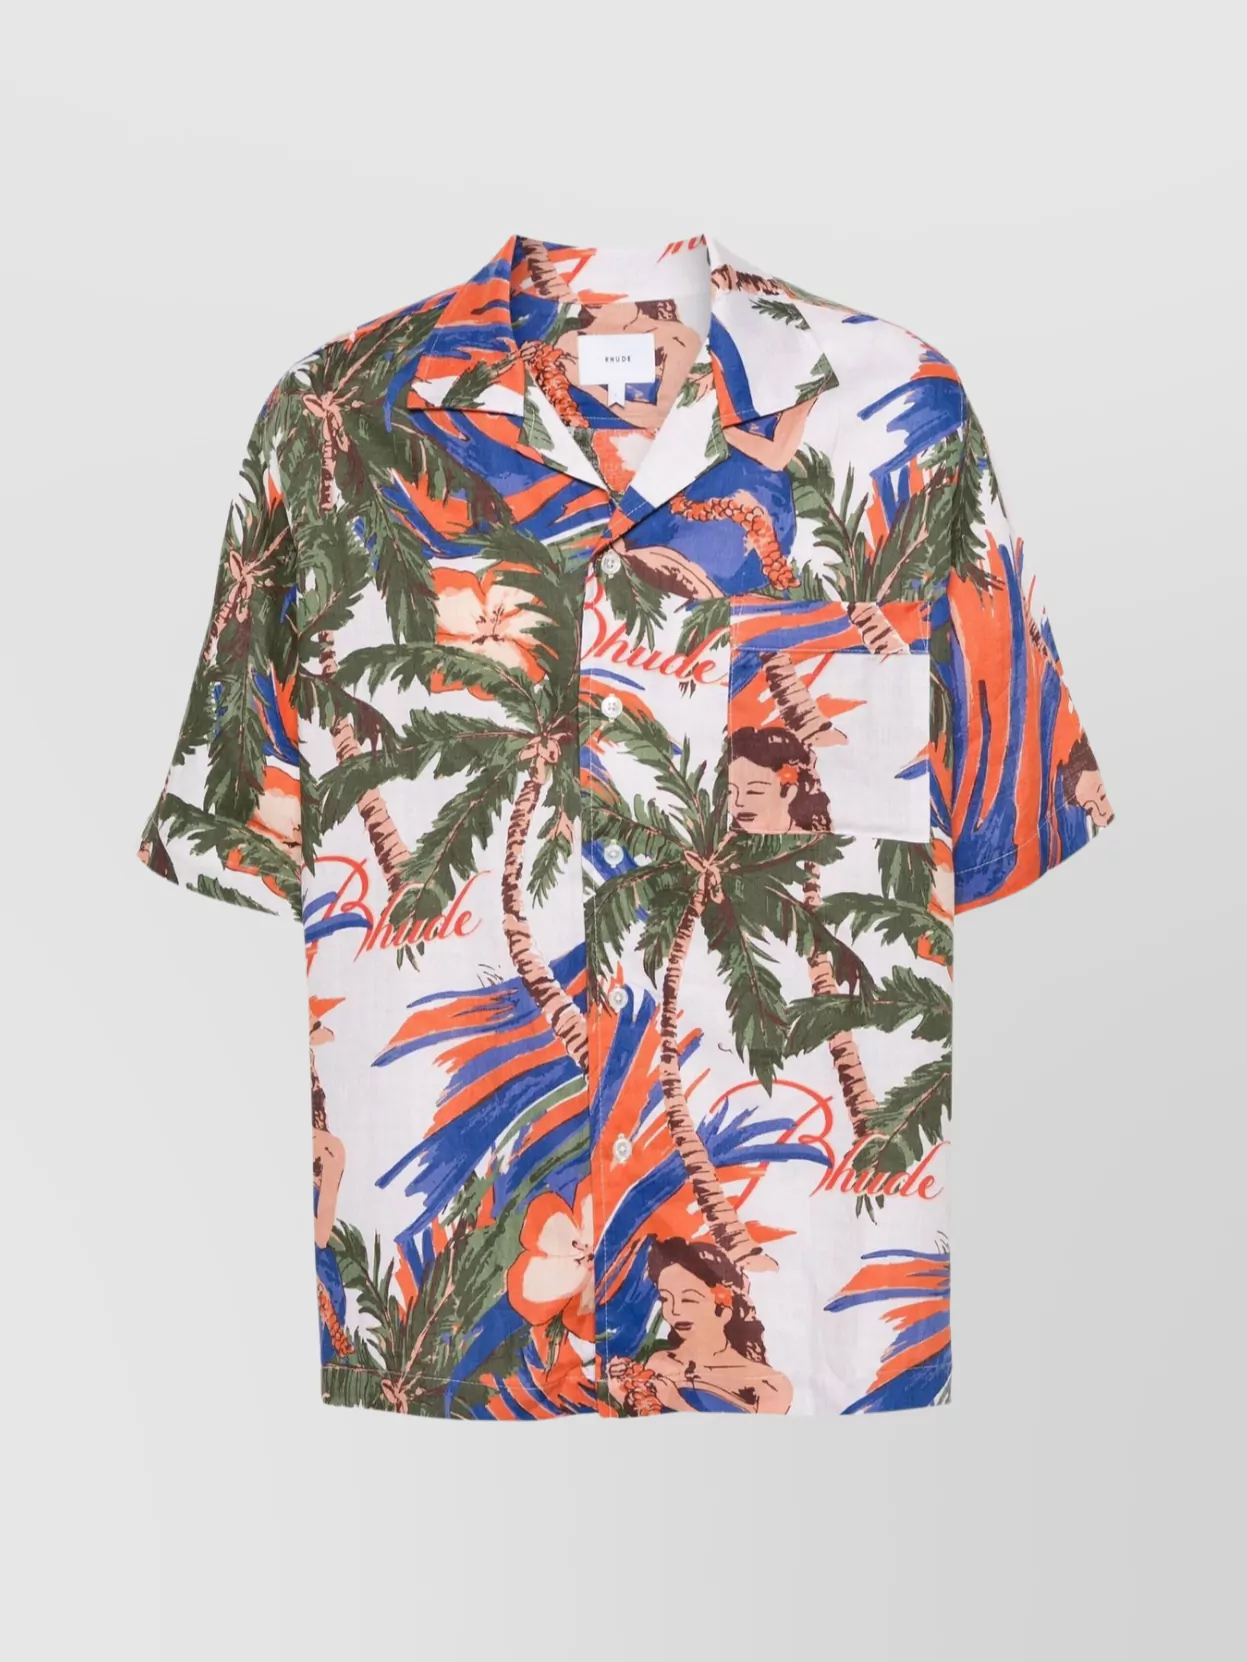 Rhude Floral Graphic Print Pocket Shirt In Green